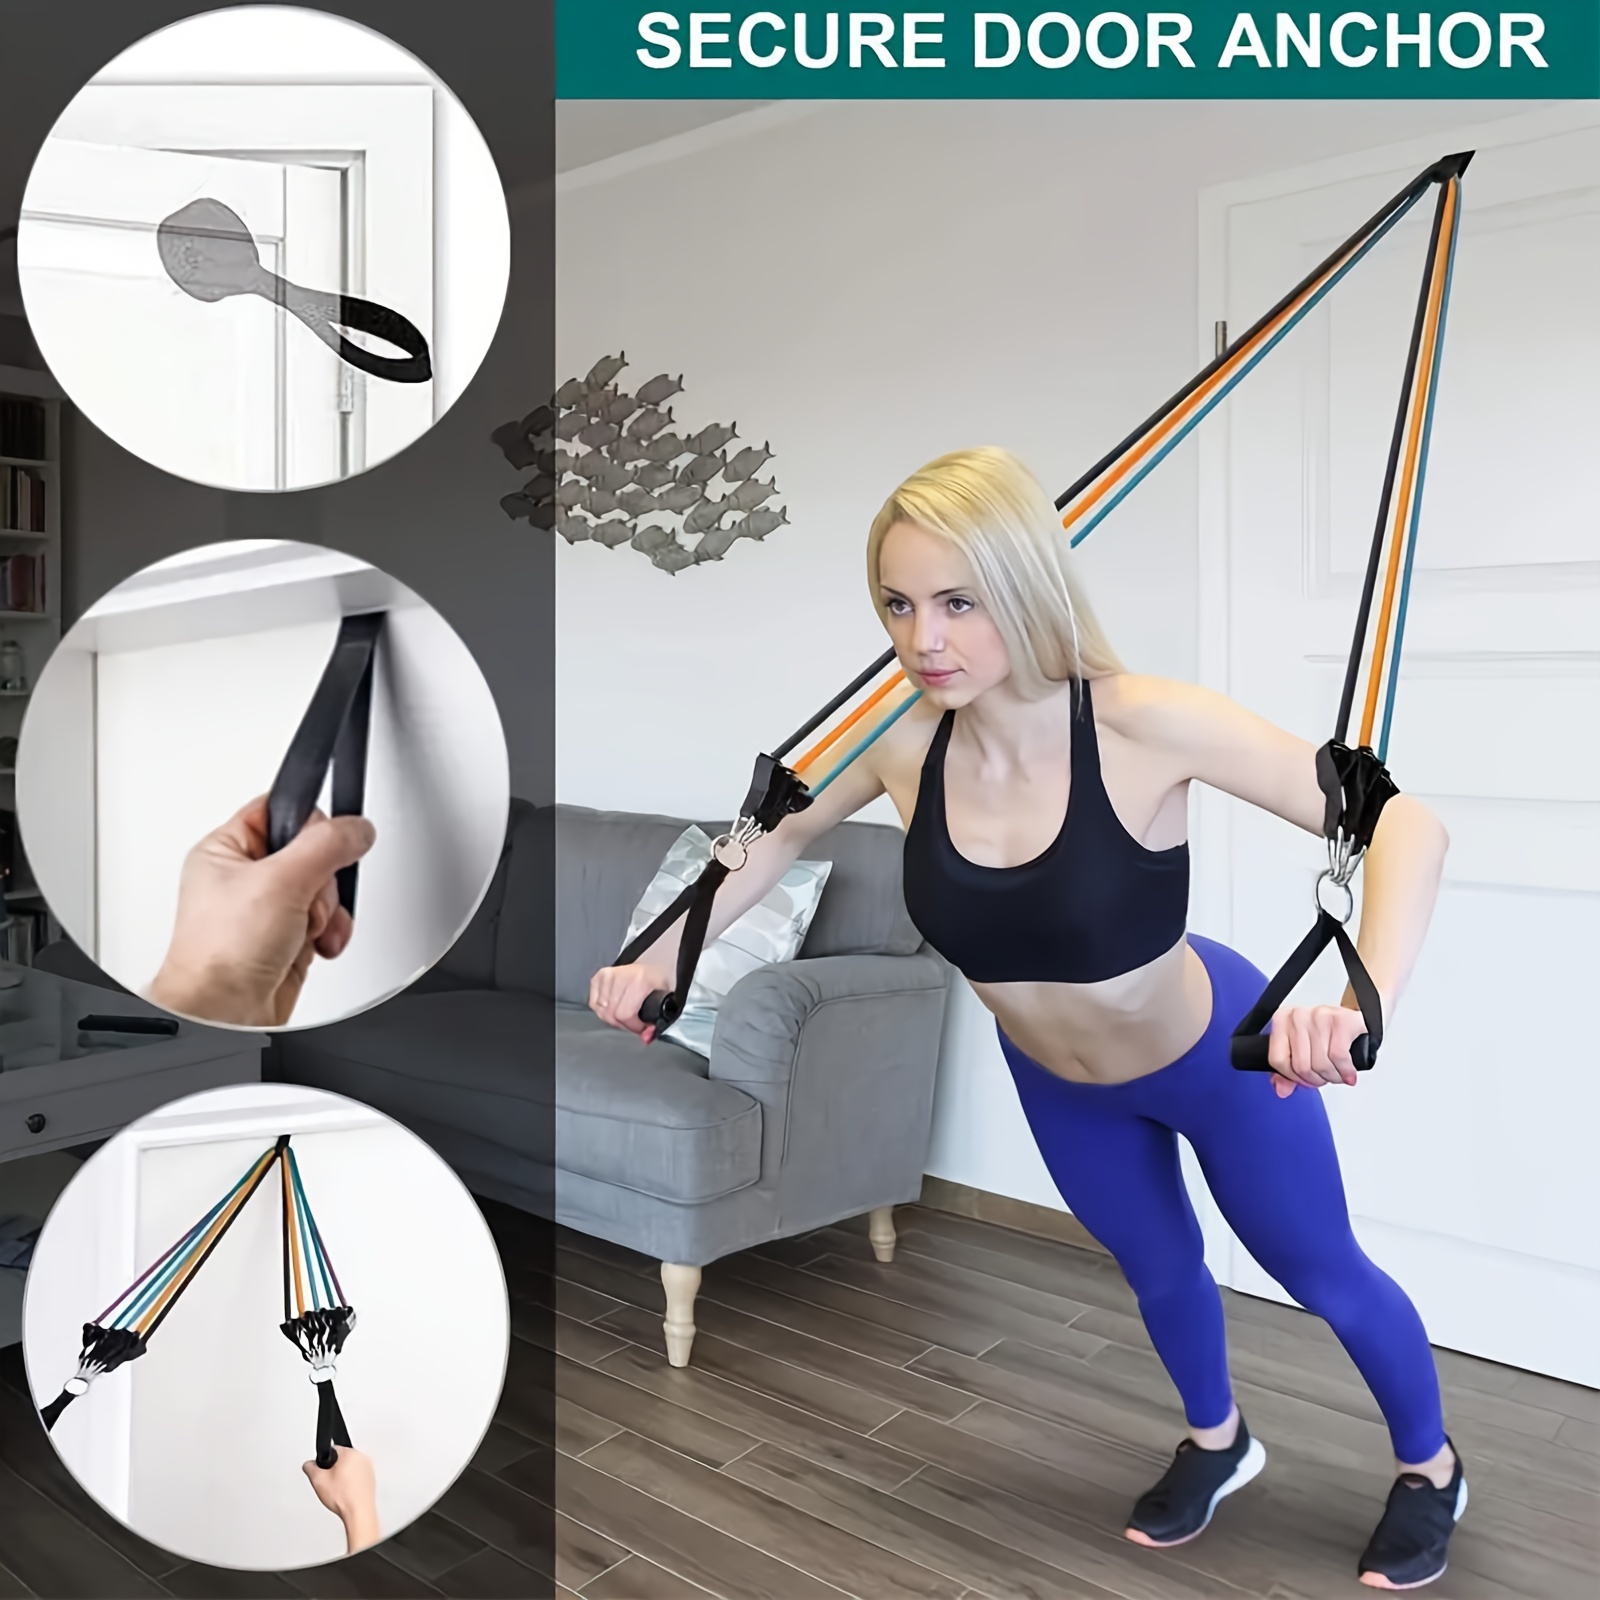 Rooxin Yoga Stretch Belt Exercise Band Door Anchor For Pilates